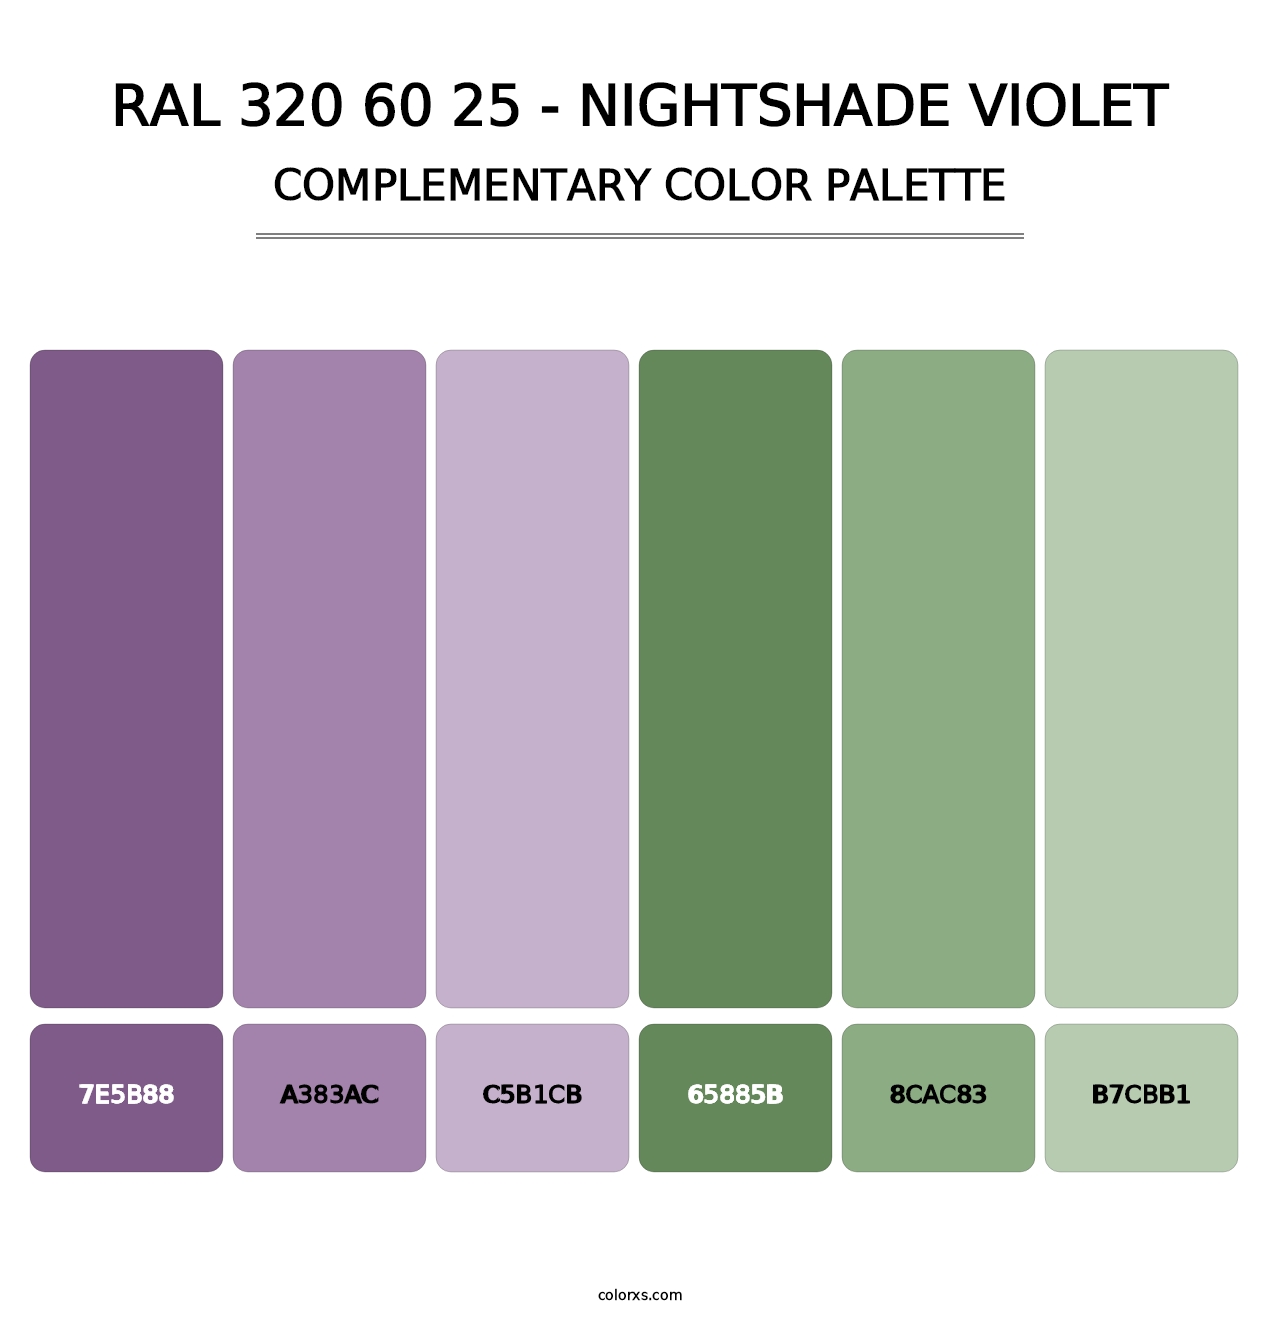 RAL 320 60 25 - Nightshade Violet - Complementary Color Palette